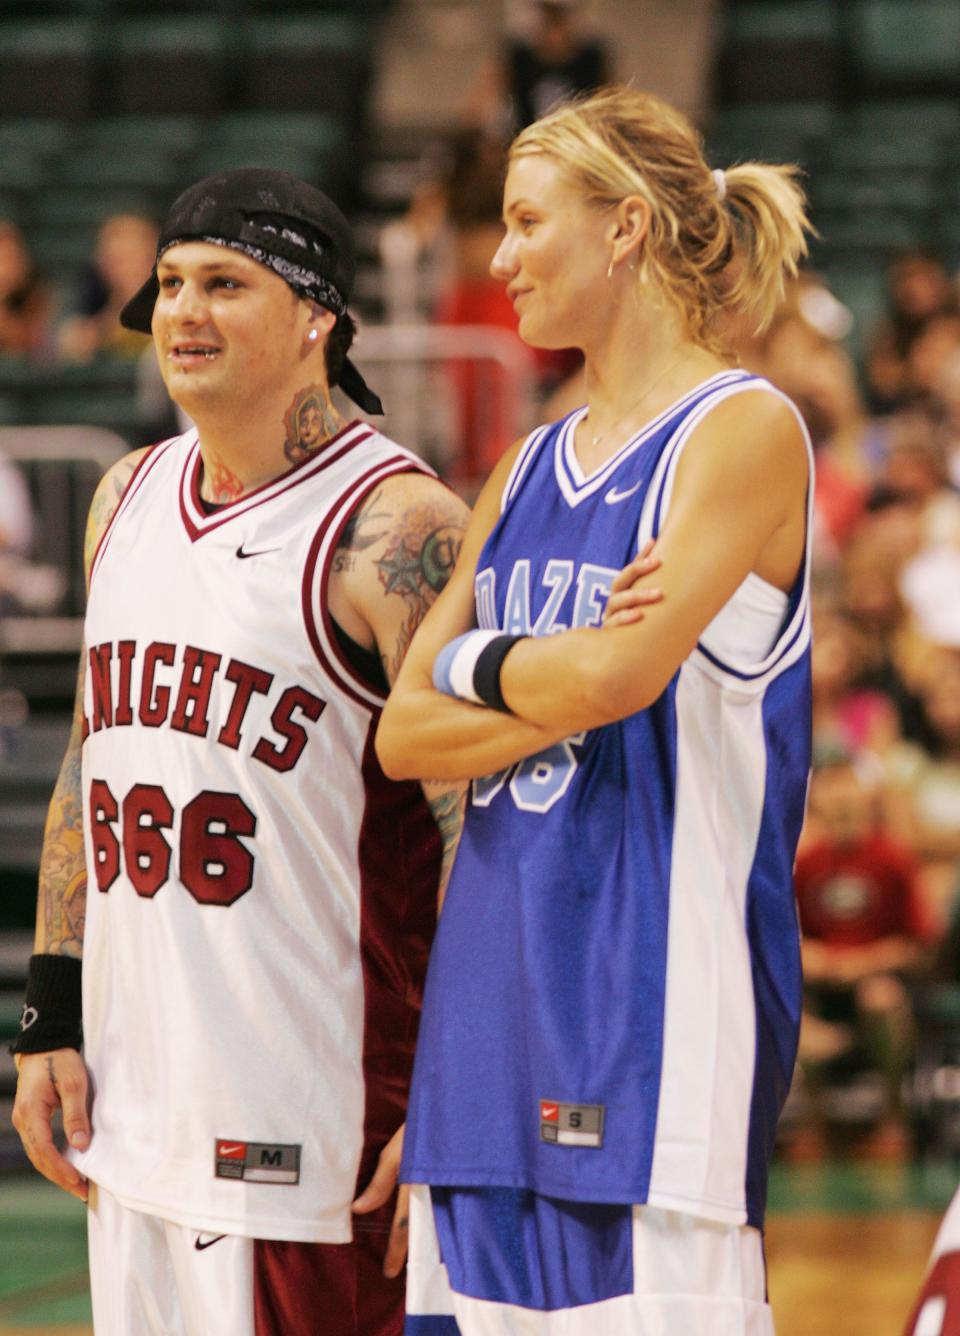 Cameron Diaz and husband, Benji Madden look amazing in basketball outfits as they are ready for the game